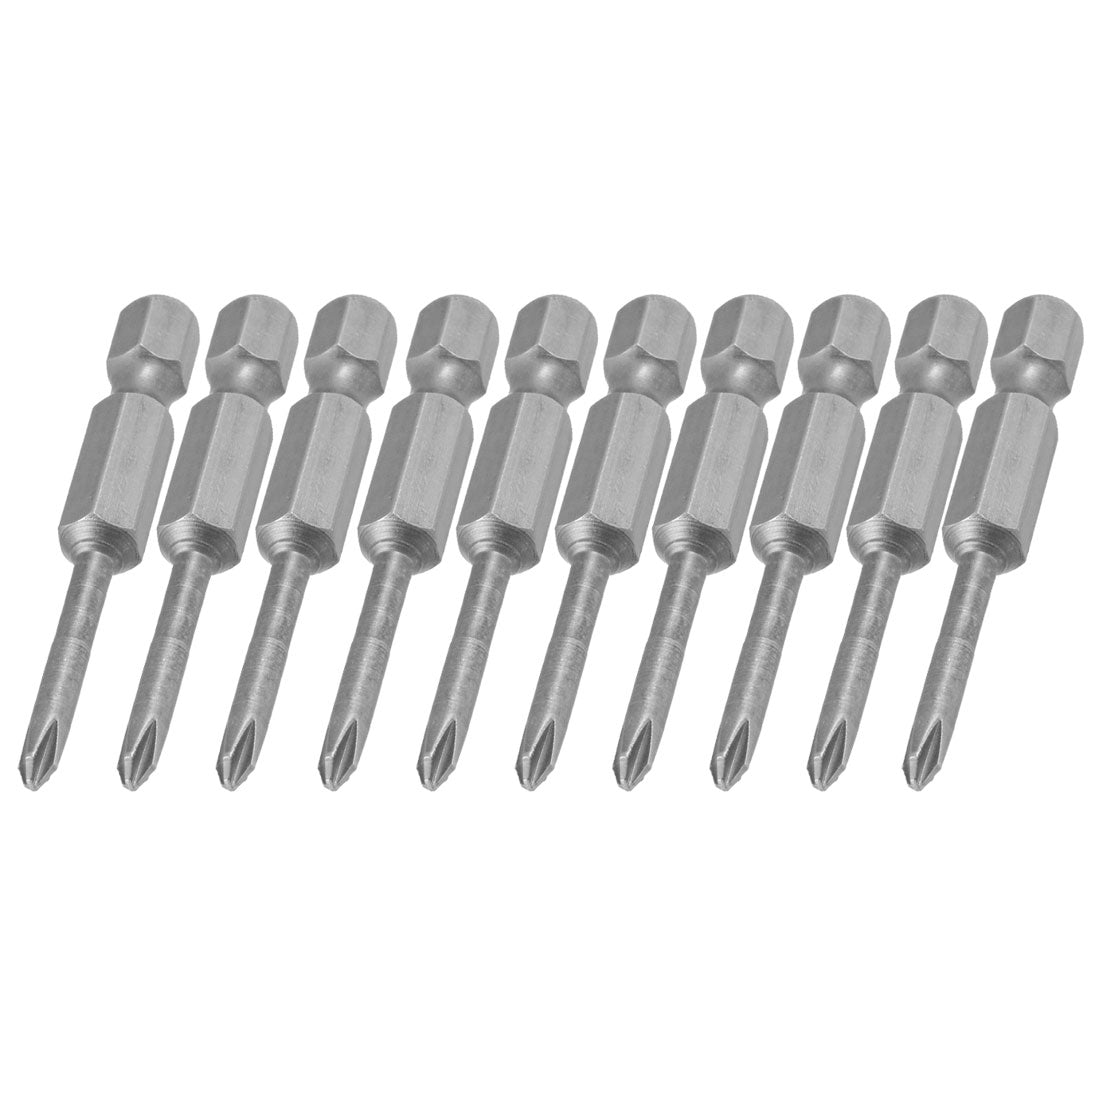 uxcell Uxcell 10 Pcs 1/4" Hex Shank Magnetic 3mm PH1 Phillips Screwdriver Bits